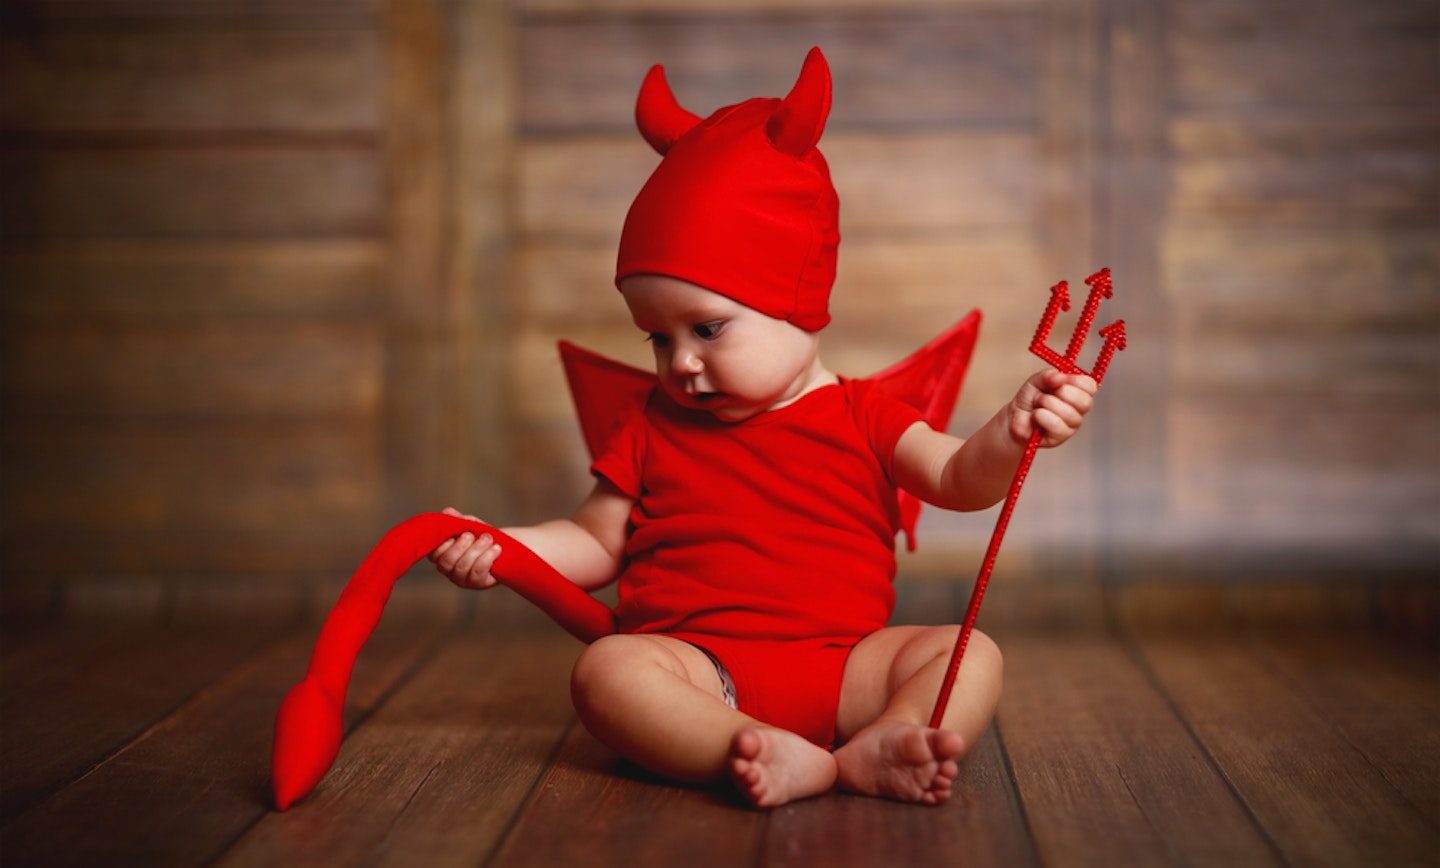 Halloween costumes for babies and toddlers